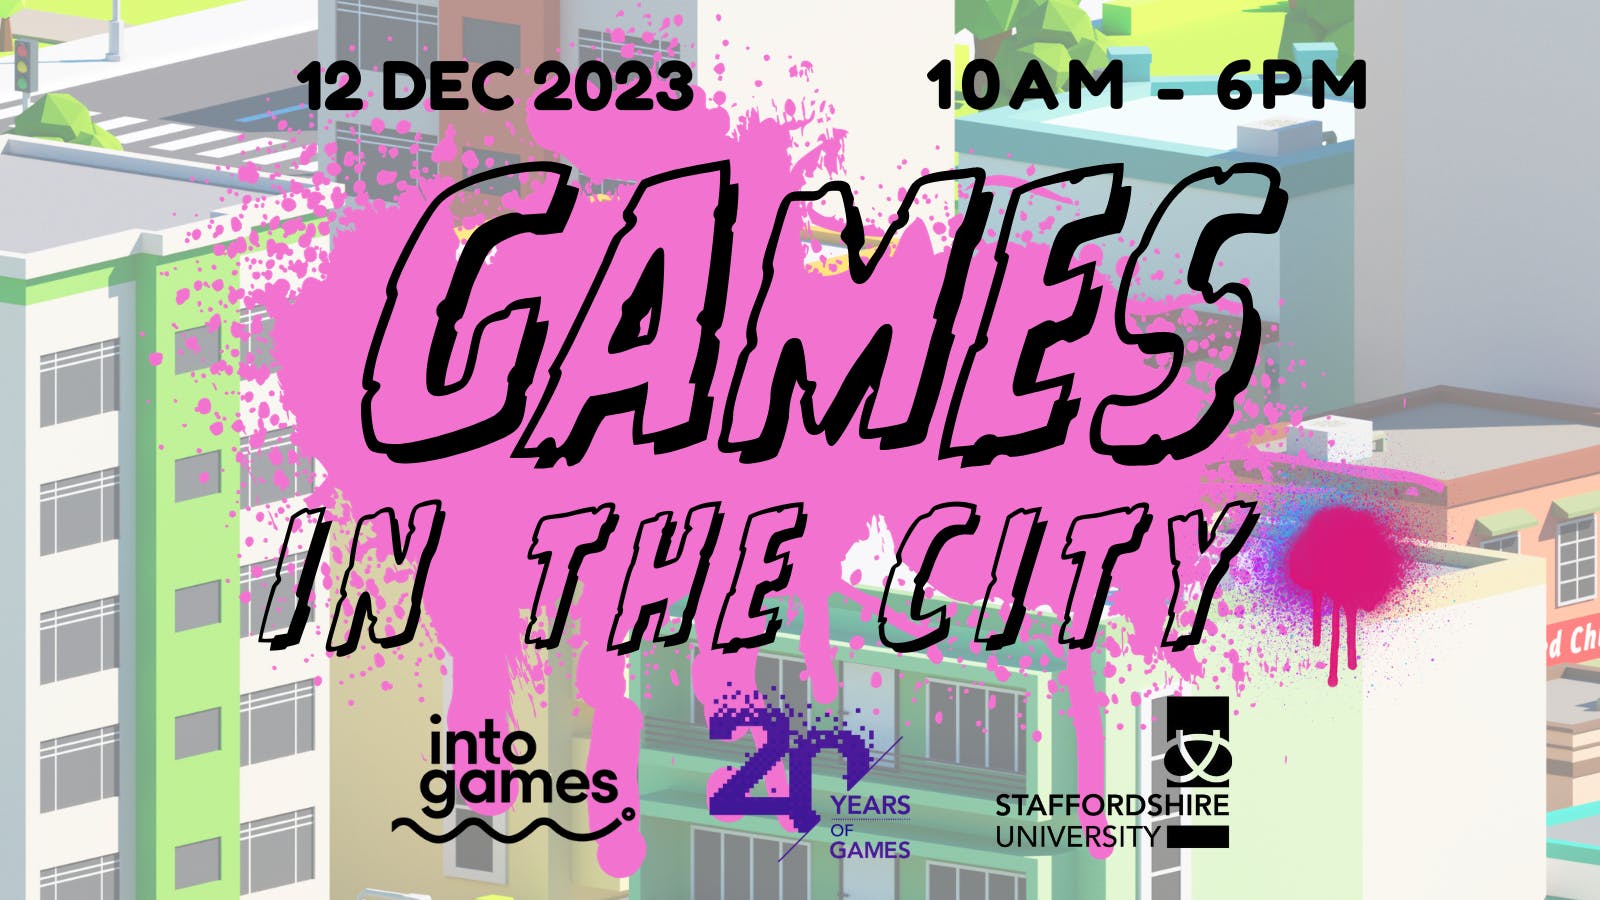 Games in the City Festival hits Staffordshire University on 11-15th December!